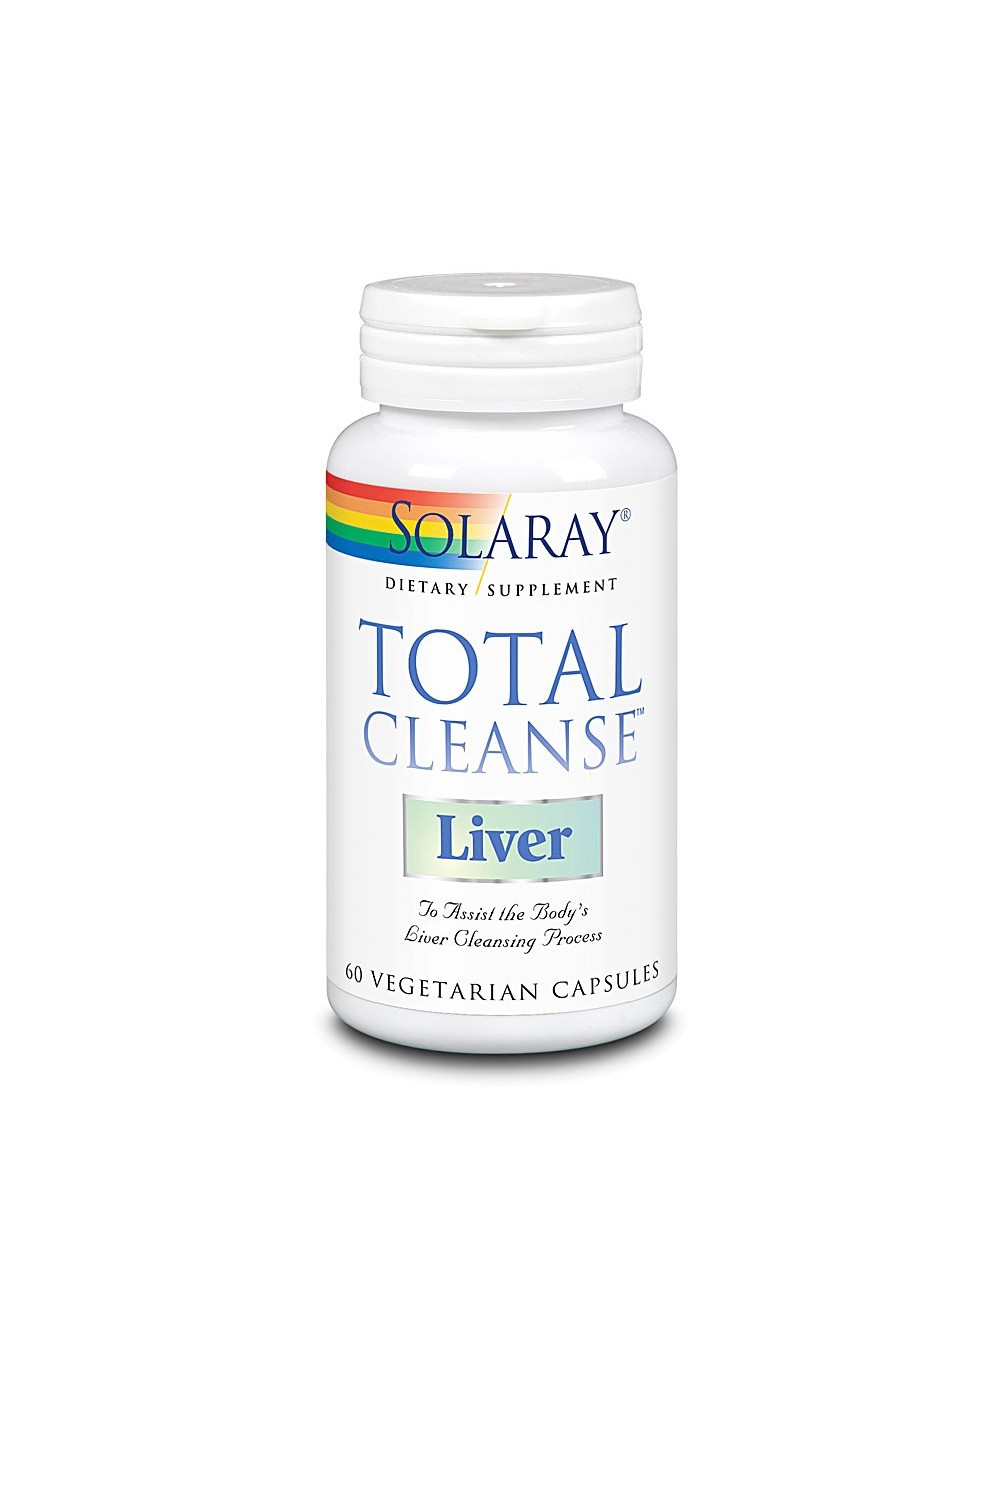 Solaray Total Cleanse Liver 60 Vcaps